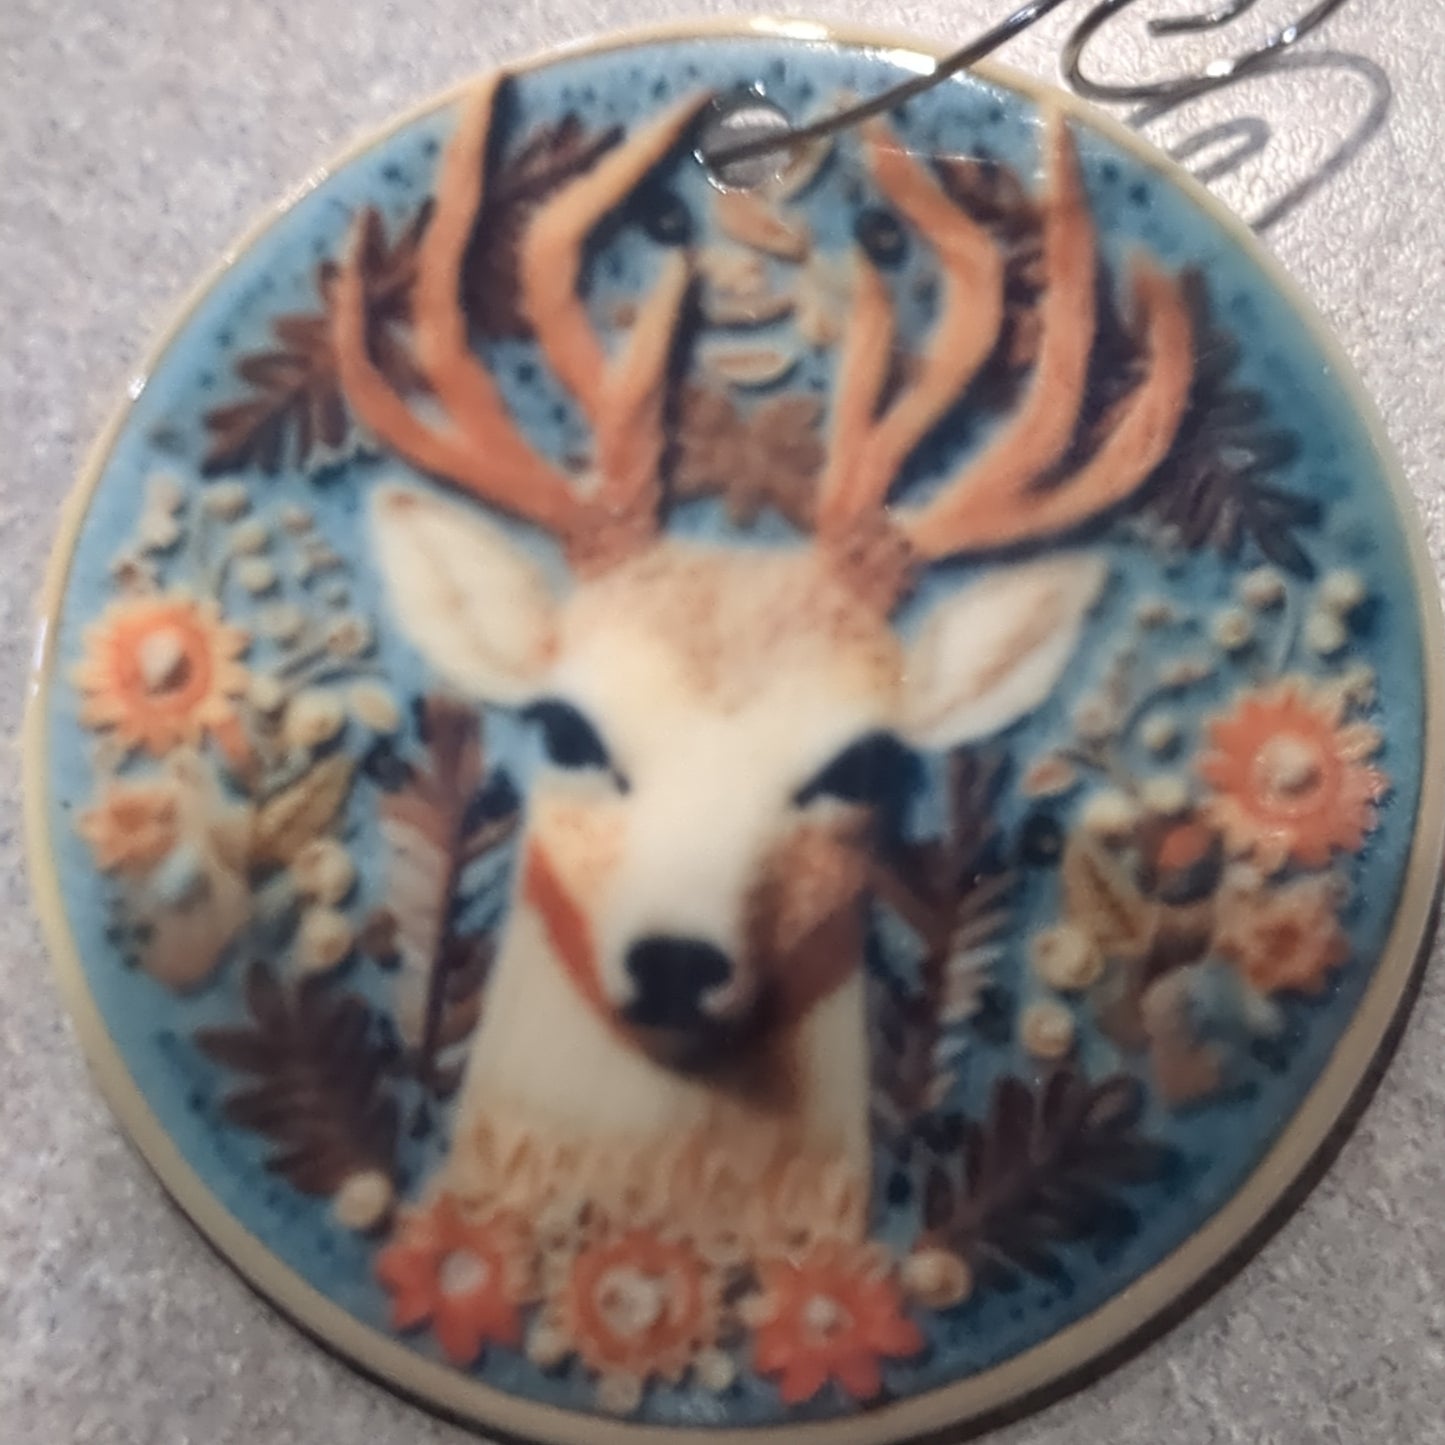 Ceramic ornament with a deer head surrounded by flowers and leaves, it appears 3D but it is not